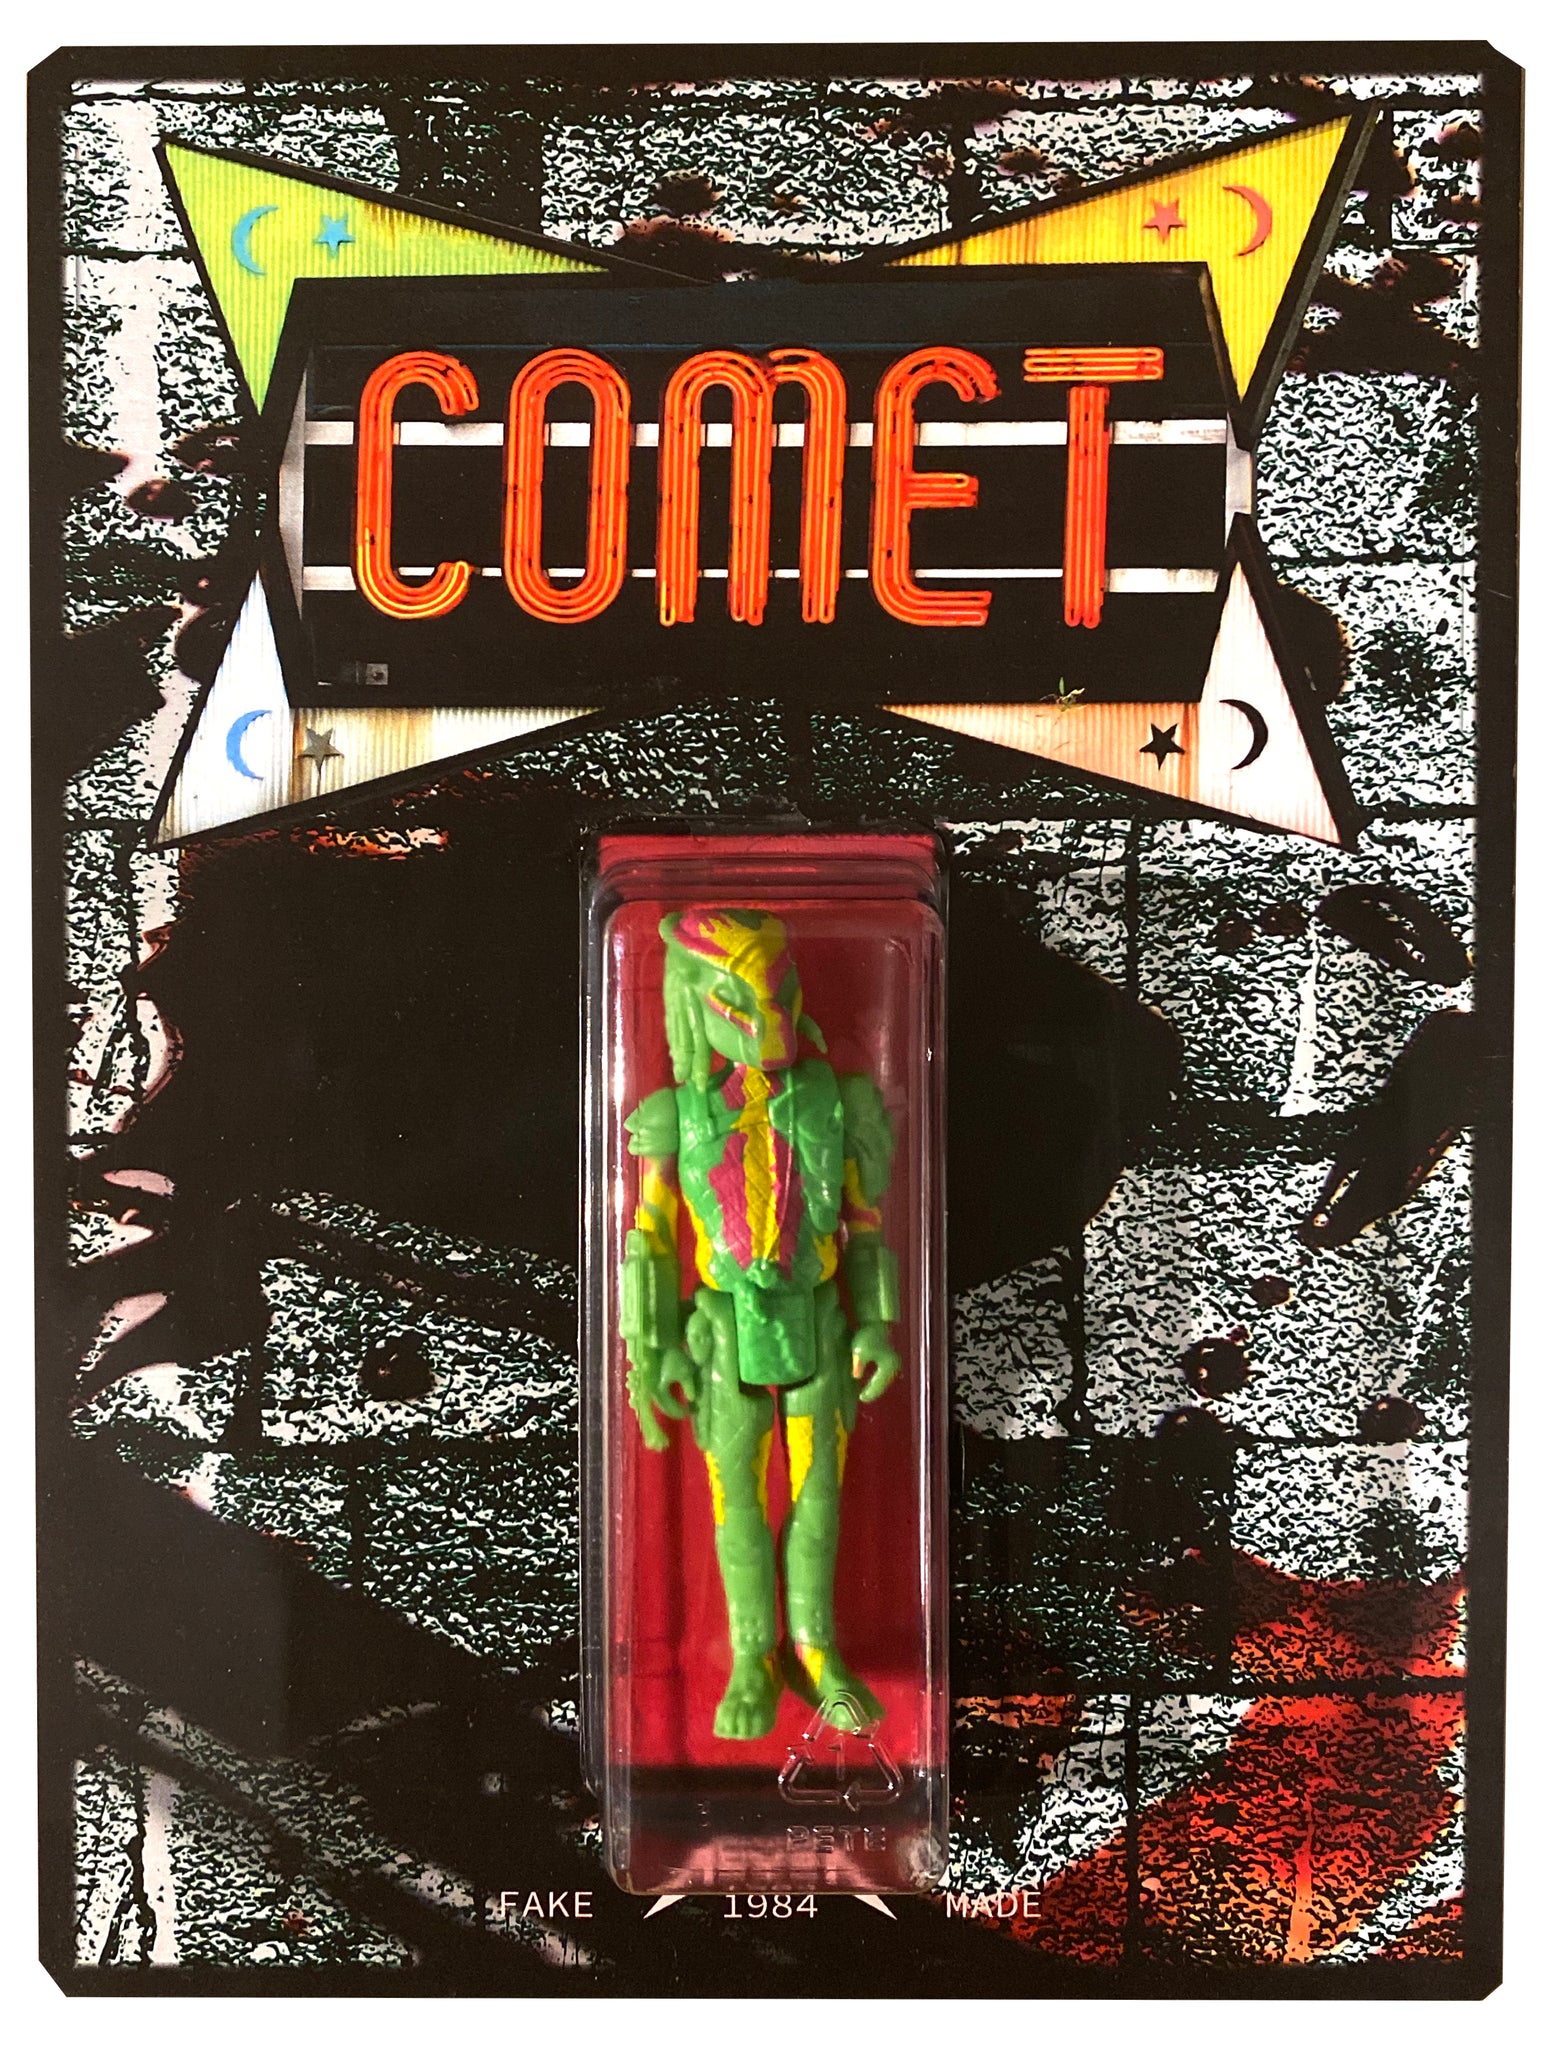 FAKEMADE1984 Comet Ping Pong Pizzagate Action Figure Bootleg Knockoff Custom Carded Art Toy by AEQEA